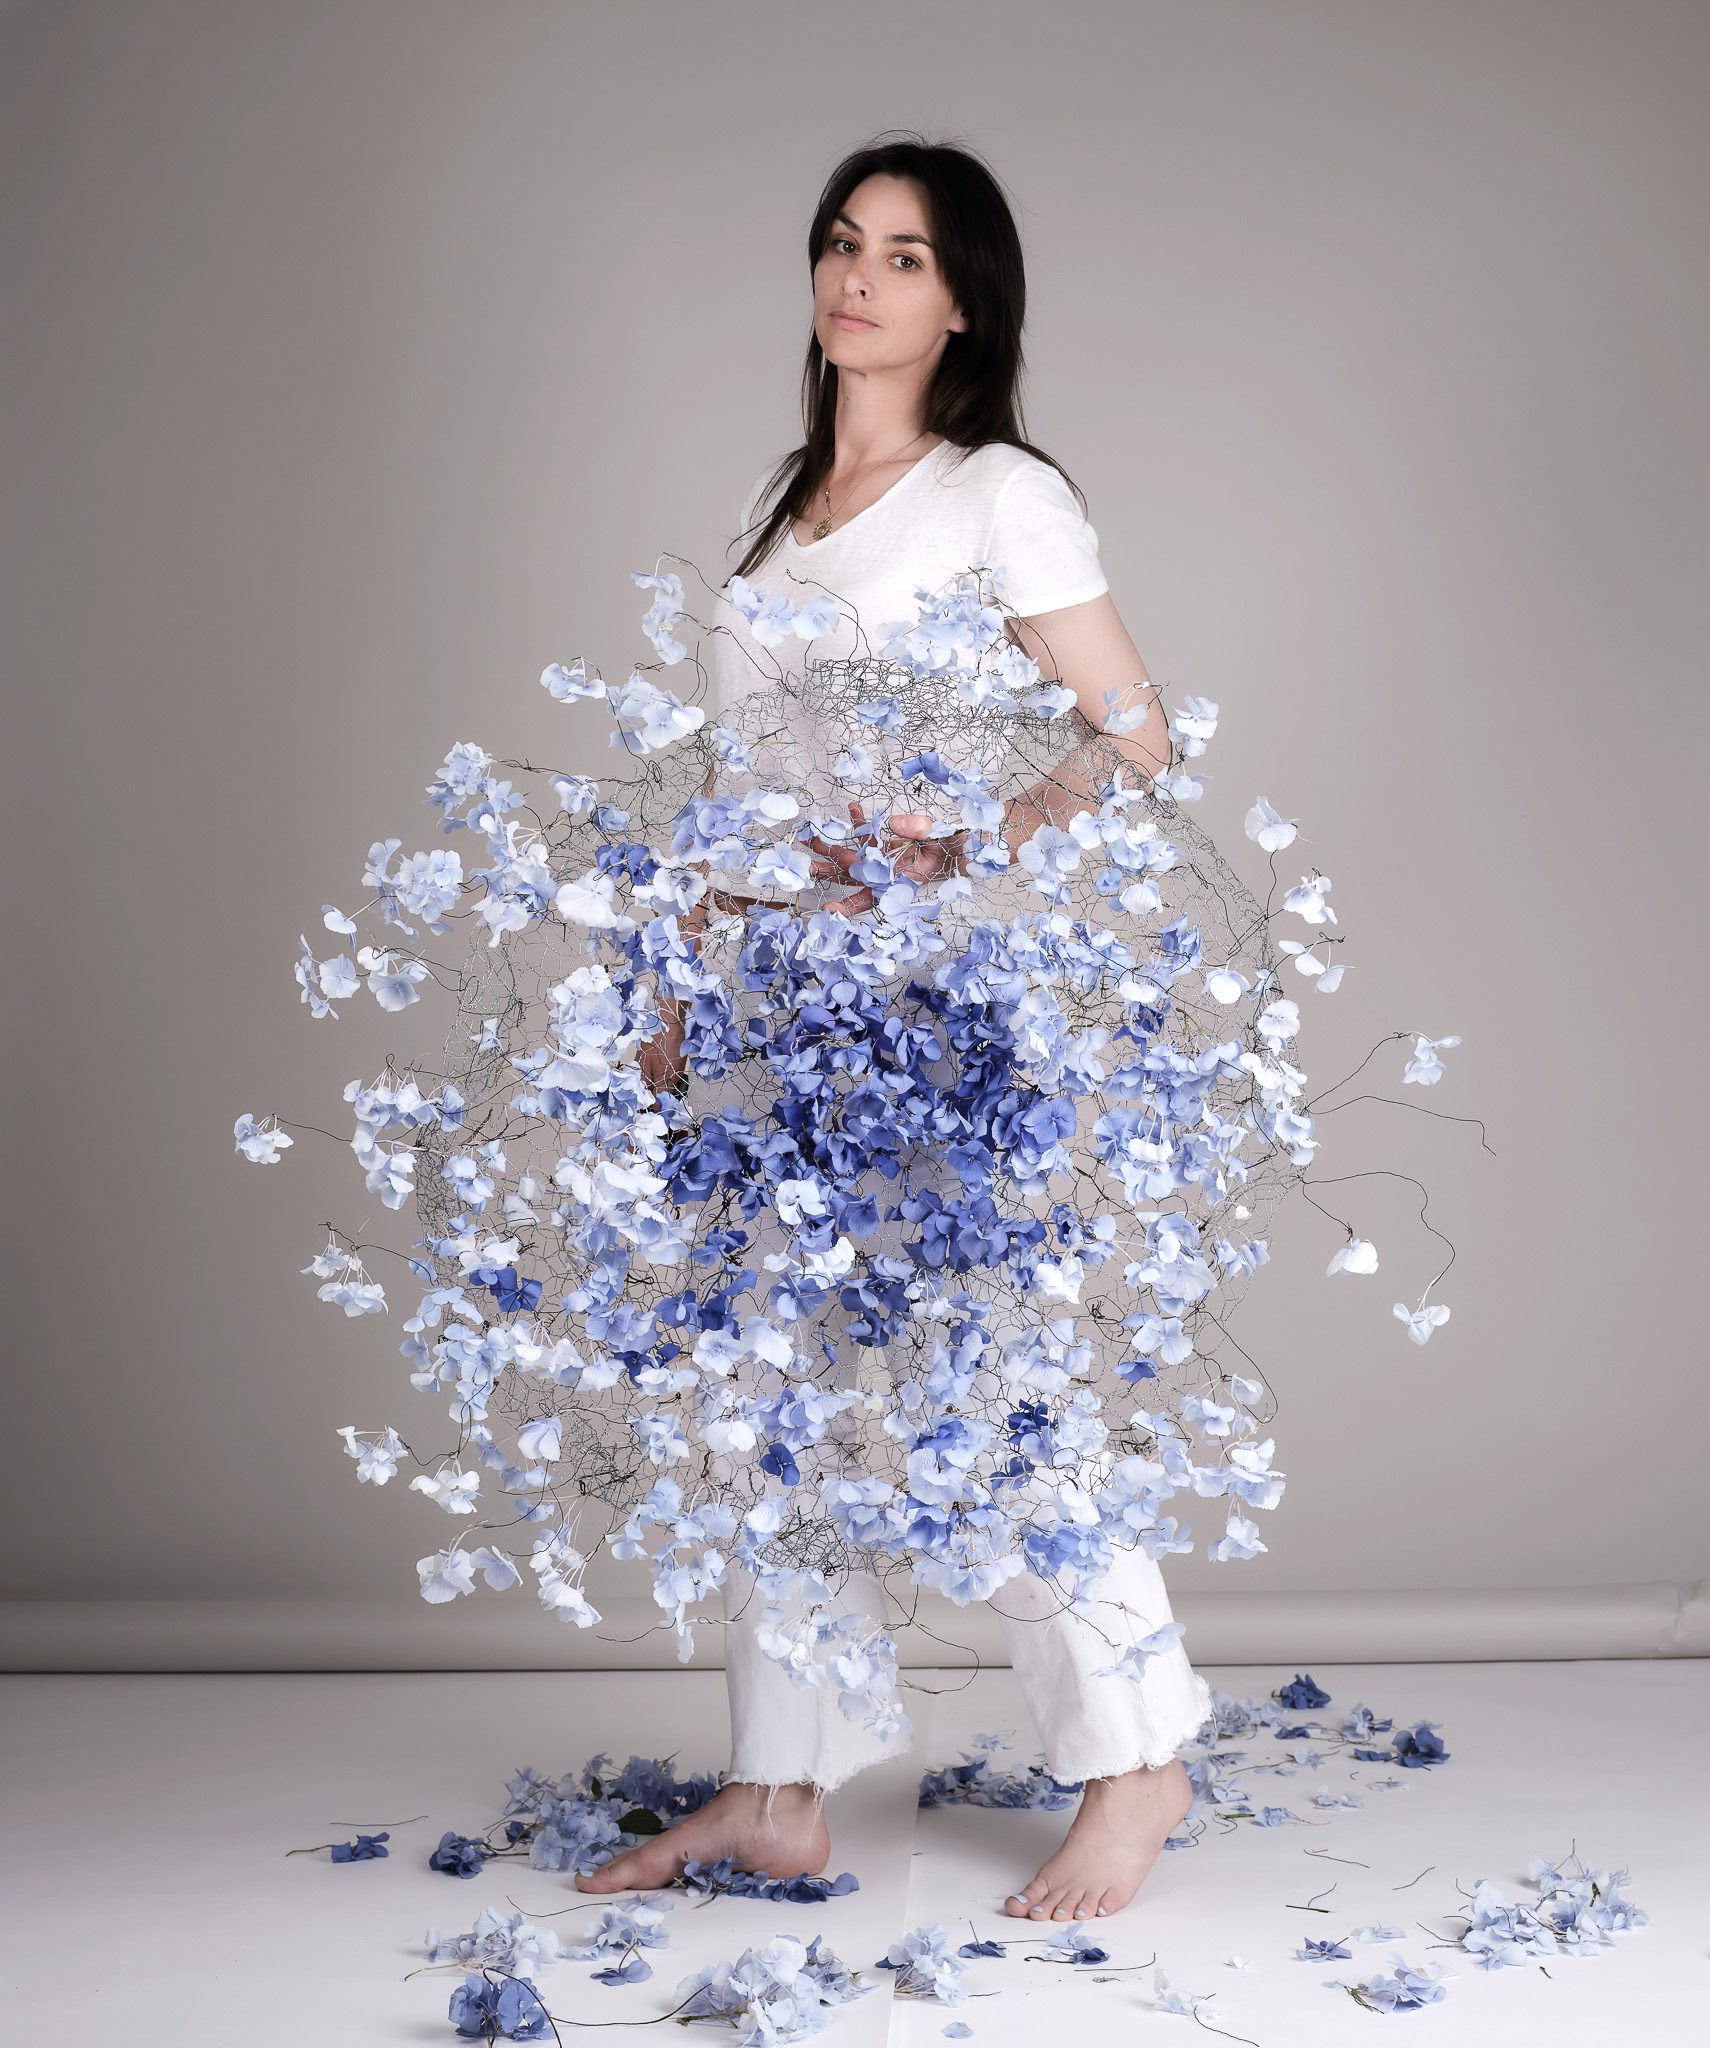 The Wick - Behind the scenes of Hydrangeas, by Isabelle van Zeijl, courtesy of the artist.